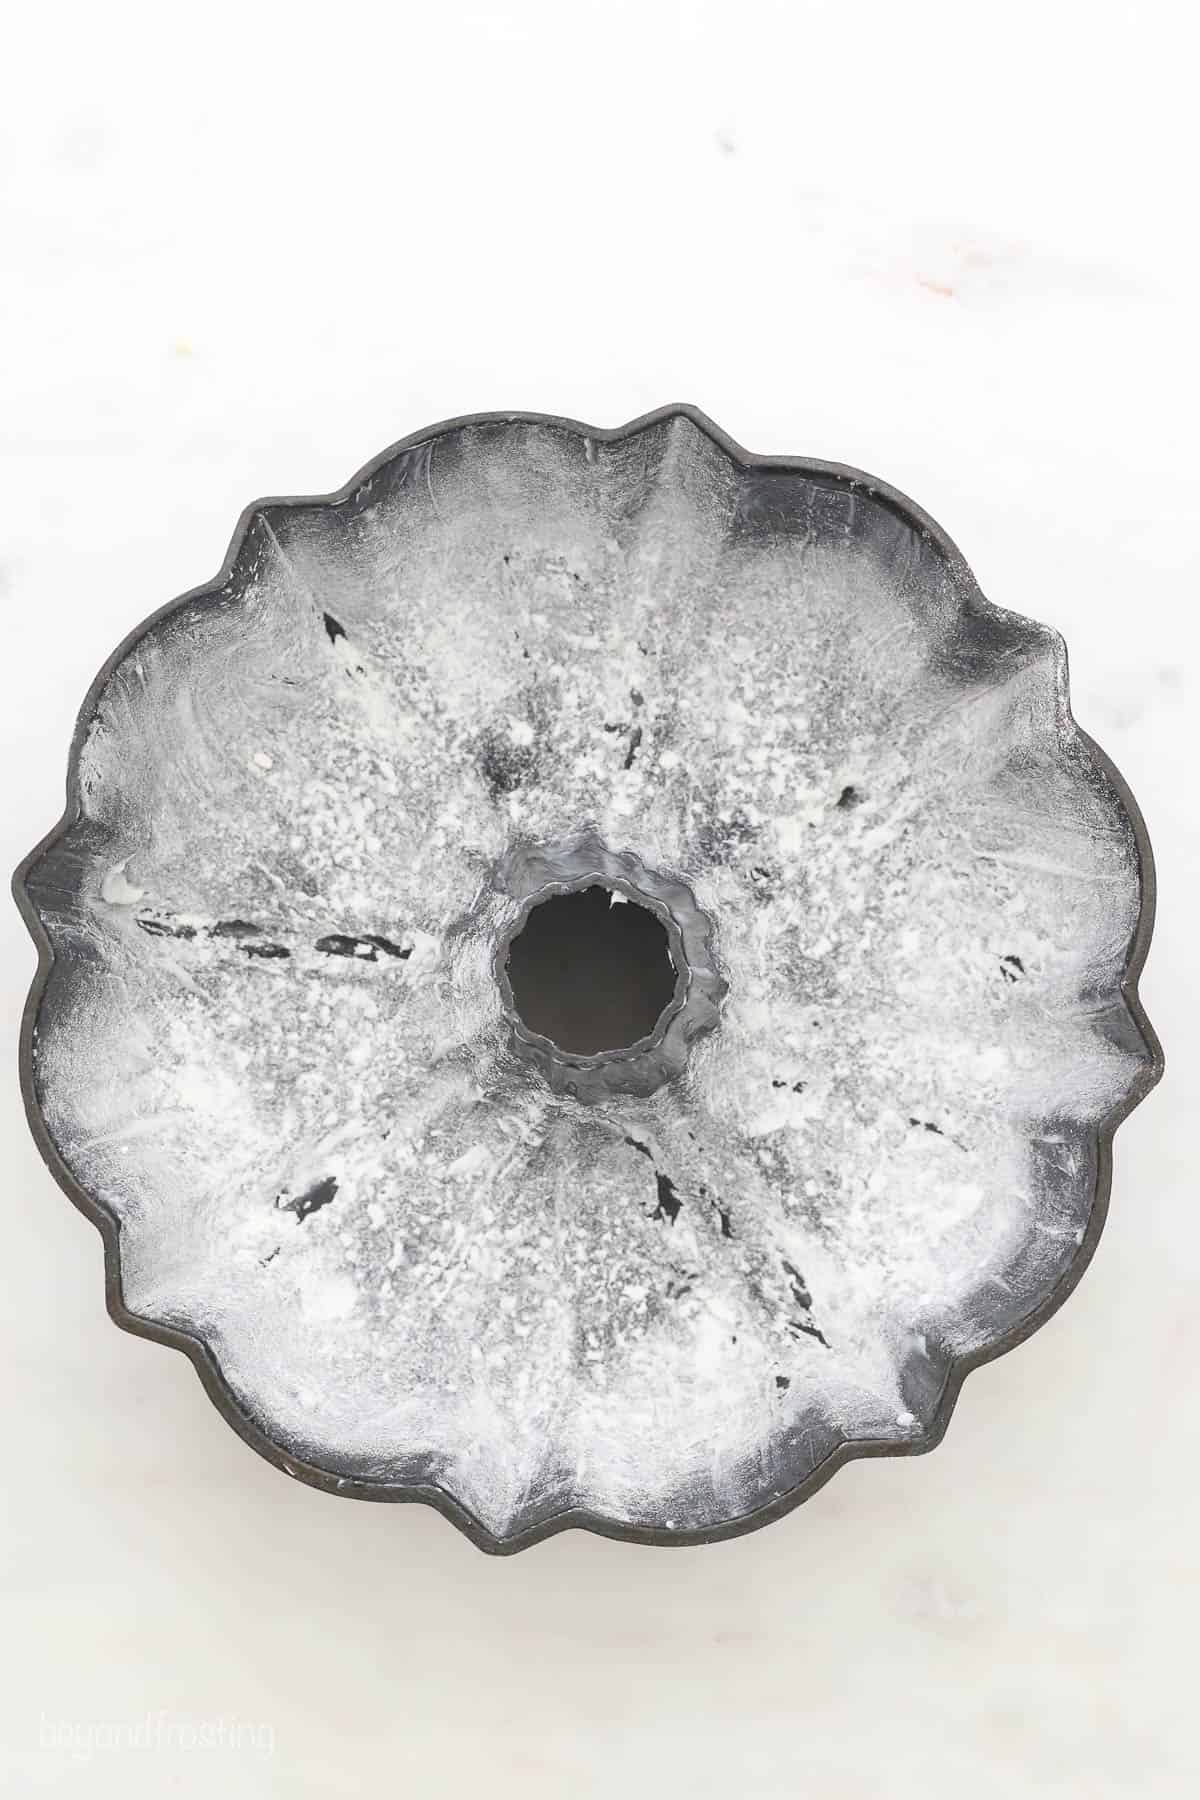 A greased and floured bundt cake pan on a white countertop